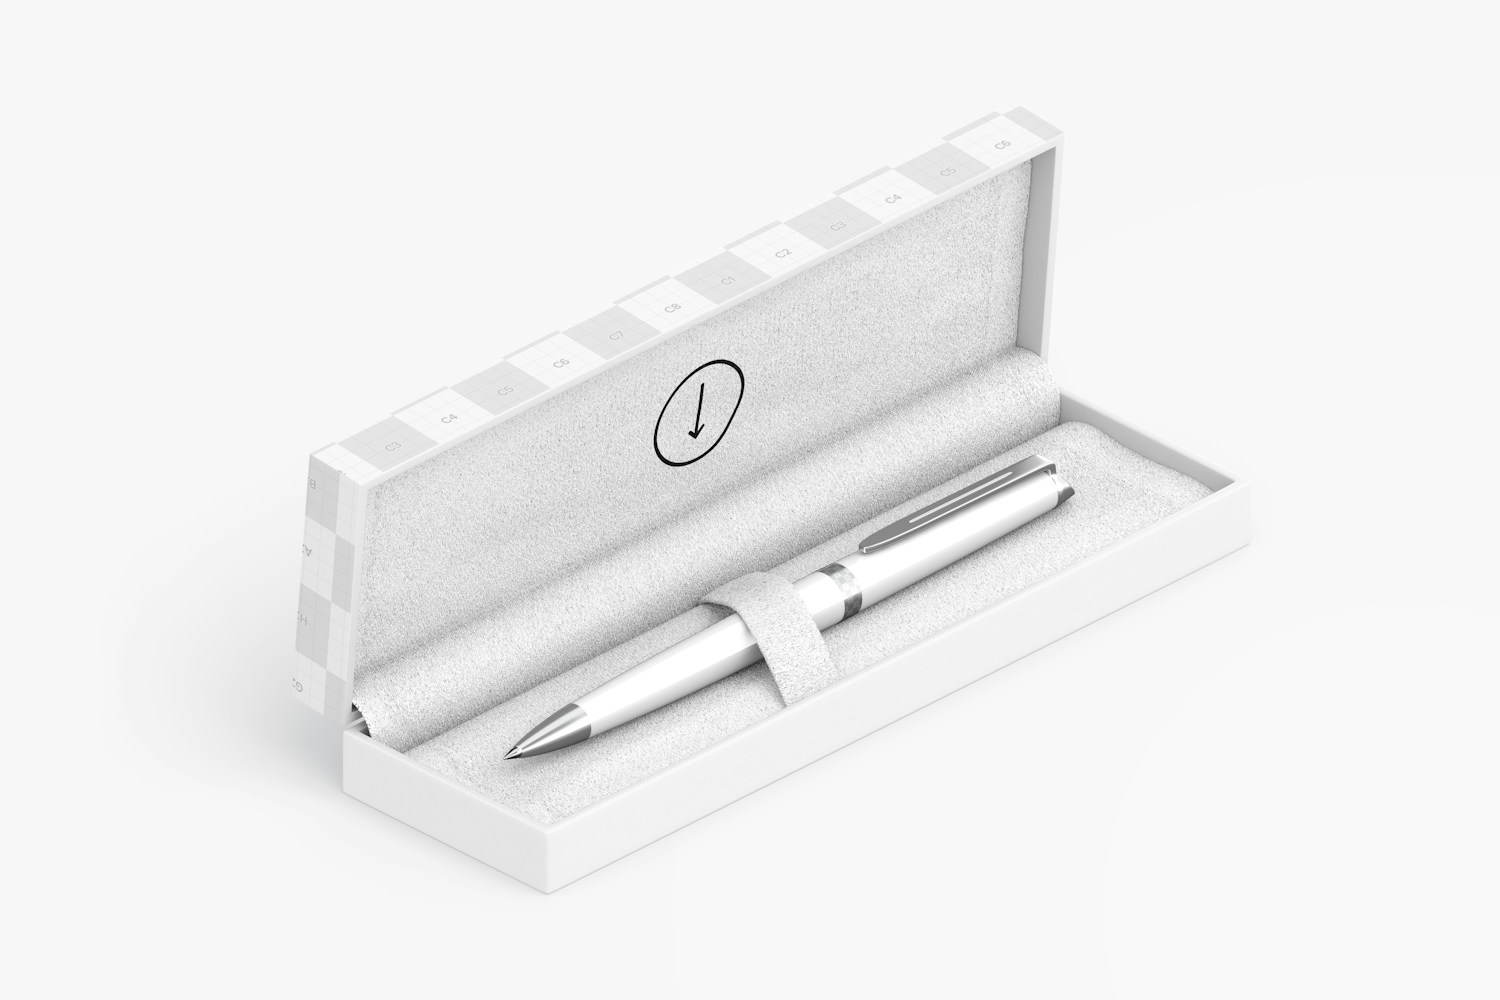 Pen In Gift Box Mockup, Isometric Right View